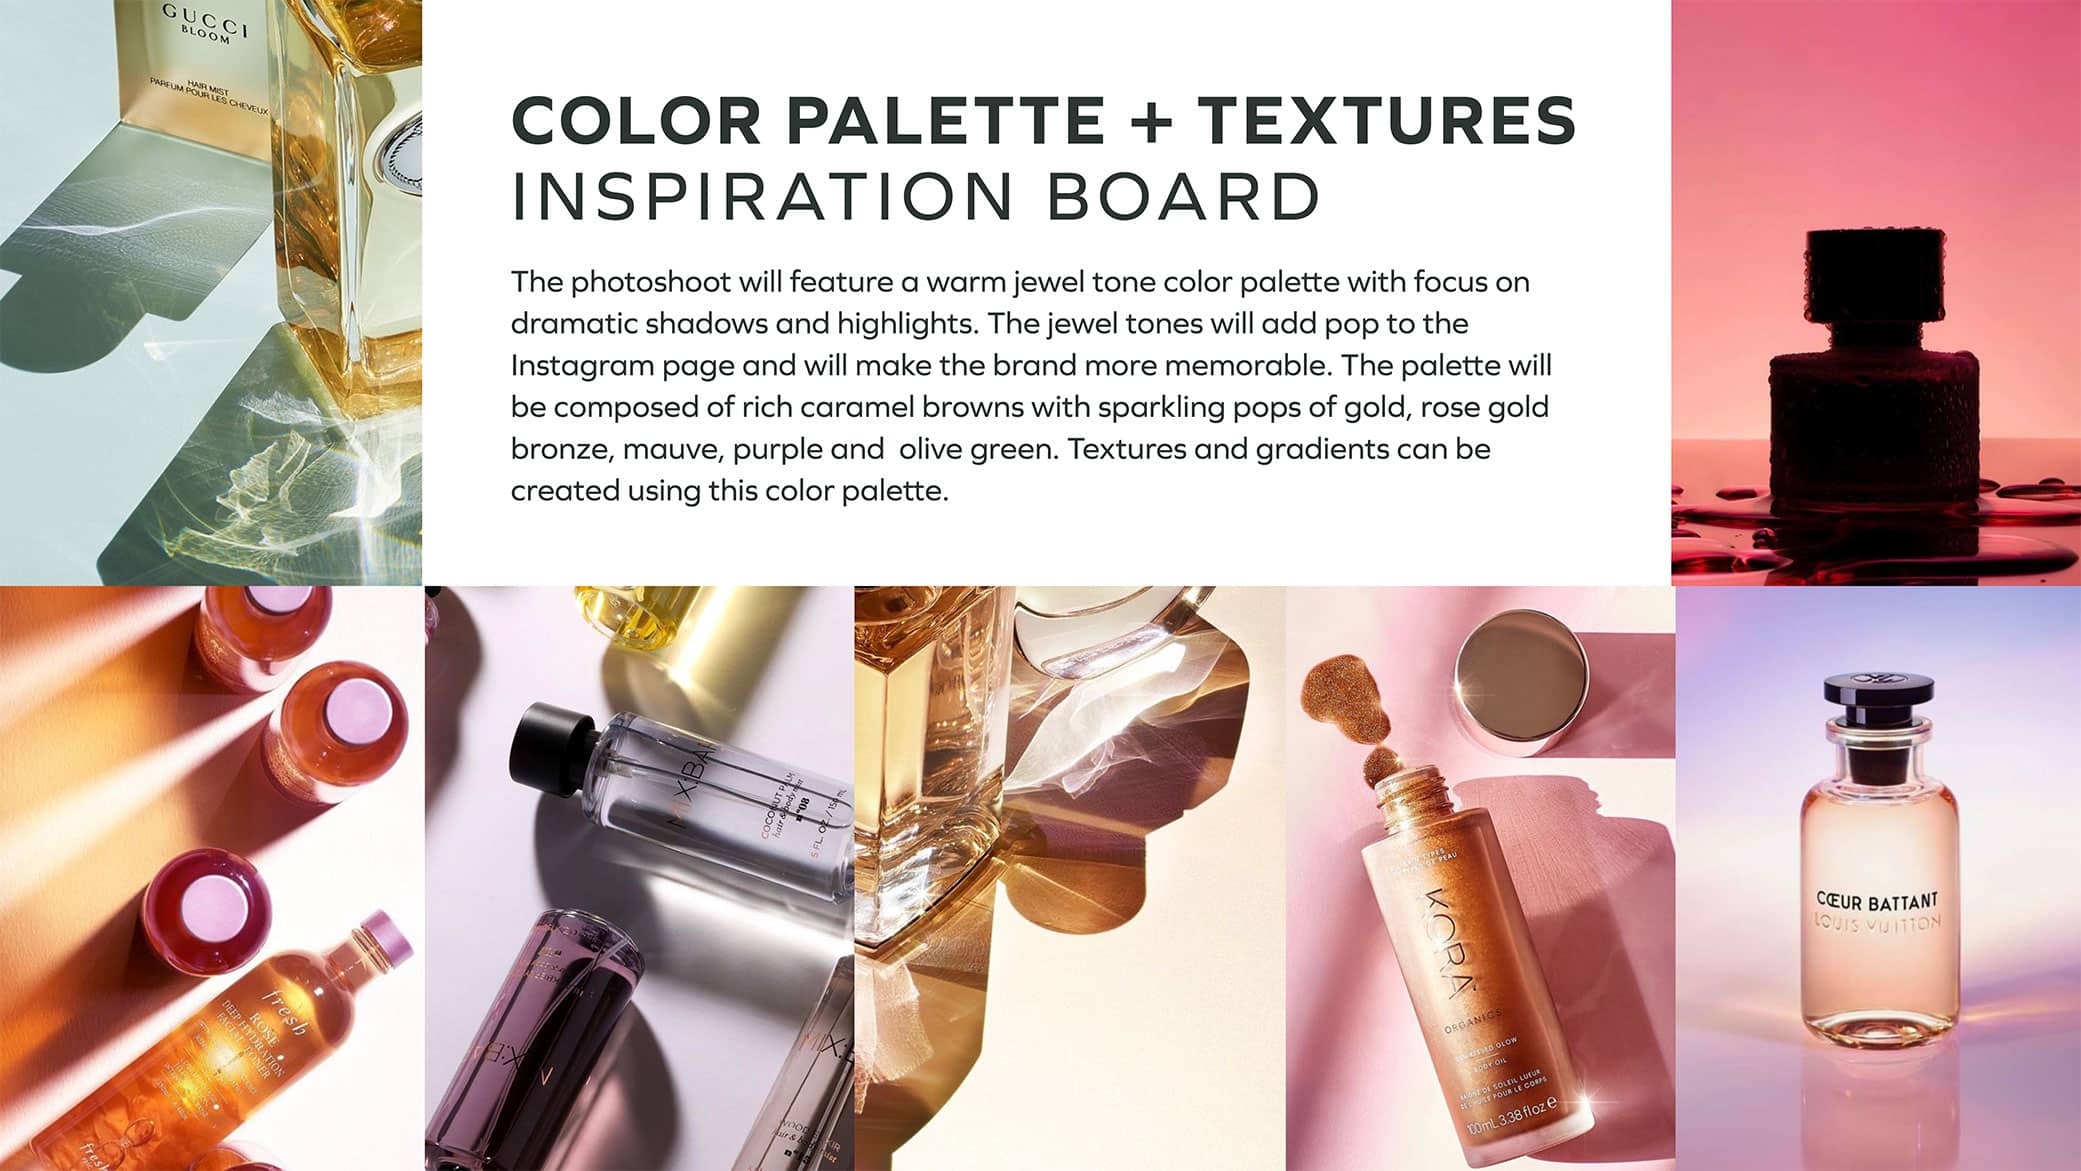 CTRL Cosmetics color palette and textures inspiration board showcasing different images with shadows and tones in gold and rose gold jewel tones.